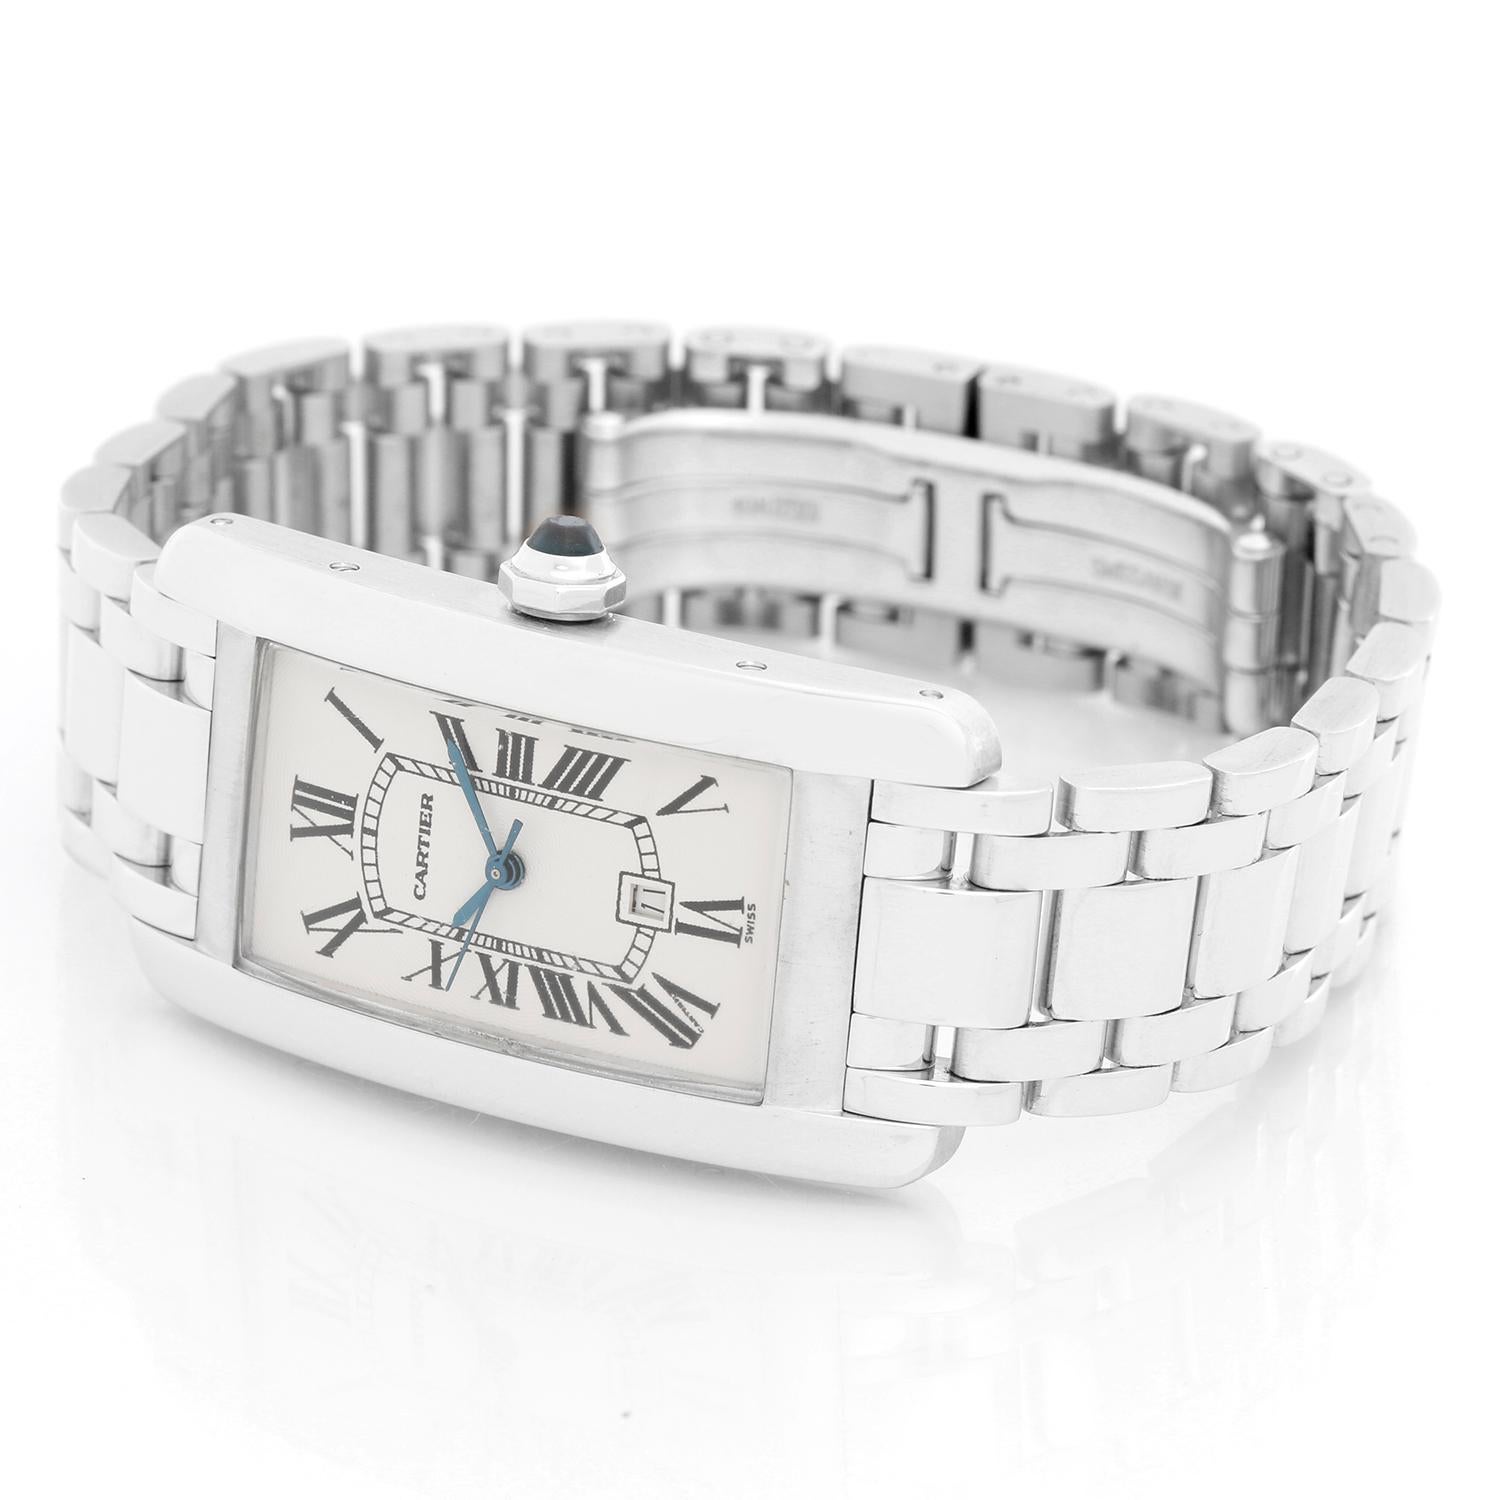 Cartier Tank Americaine 18k White Gold  Men's or Ladies Midsize Watch W26036L1 - Automatic  winding. 18k white gold case (23mm x 41mm). Ivory colored dial with black Roman numerals; date at 6 o'clock position. 18k white gold Cartier bracelet.